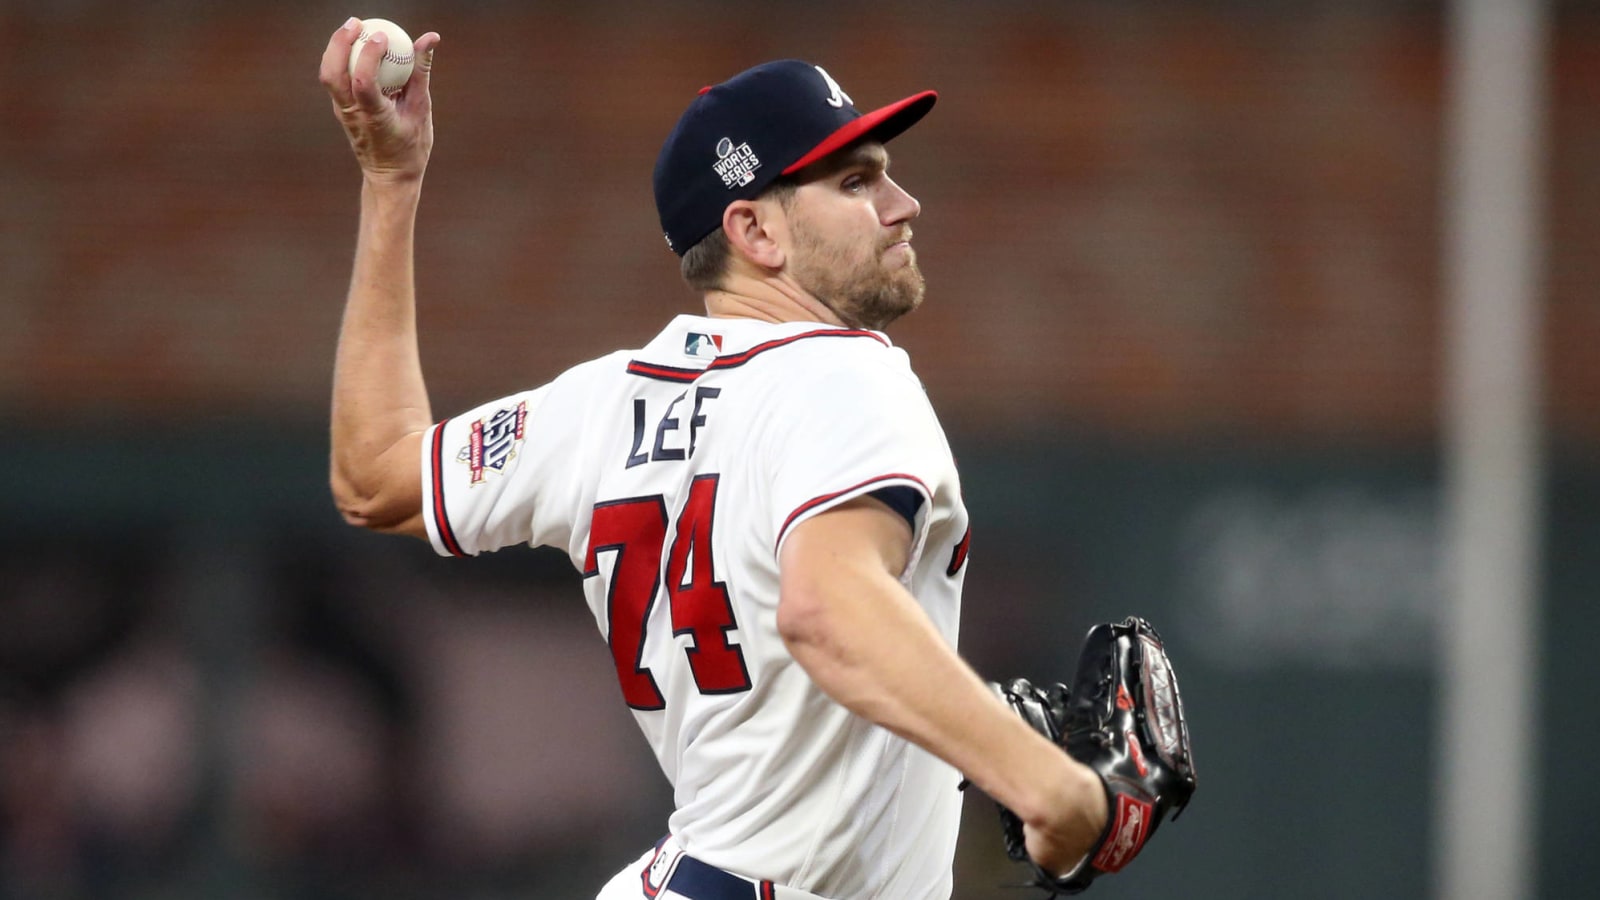 Braves pitcher Dylan Lee shares hate he got after rough outing